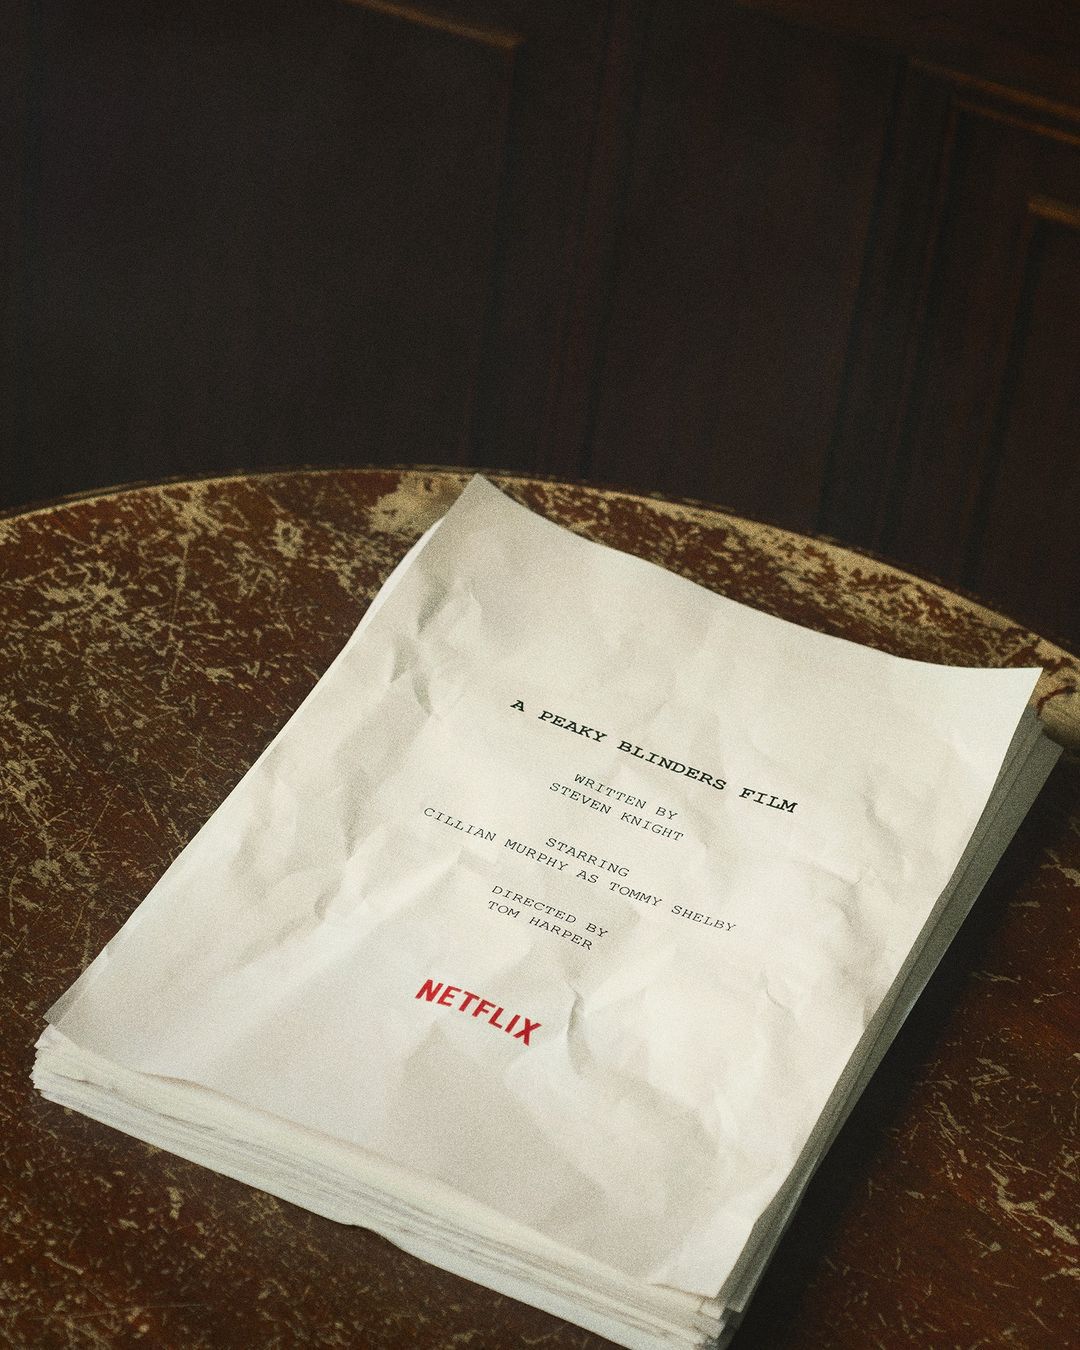 Netflix shared a photo of the script for the film "Peaky Blinders".